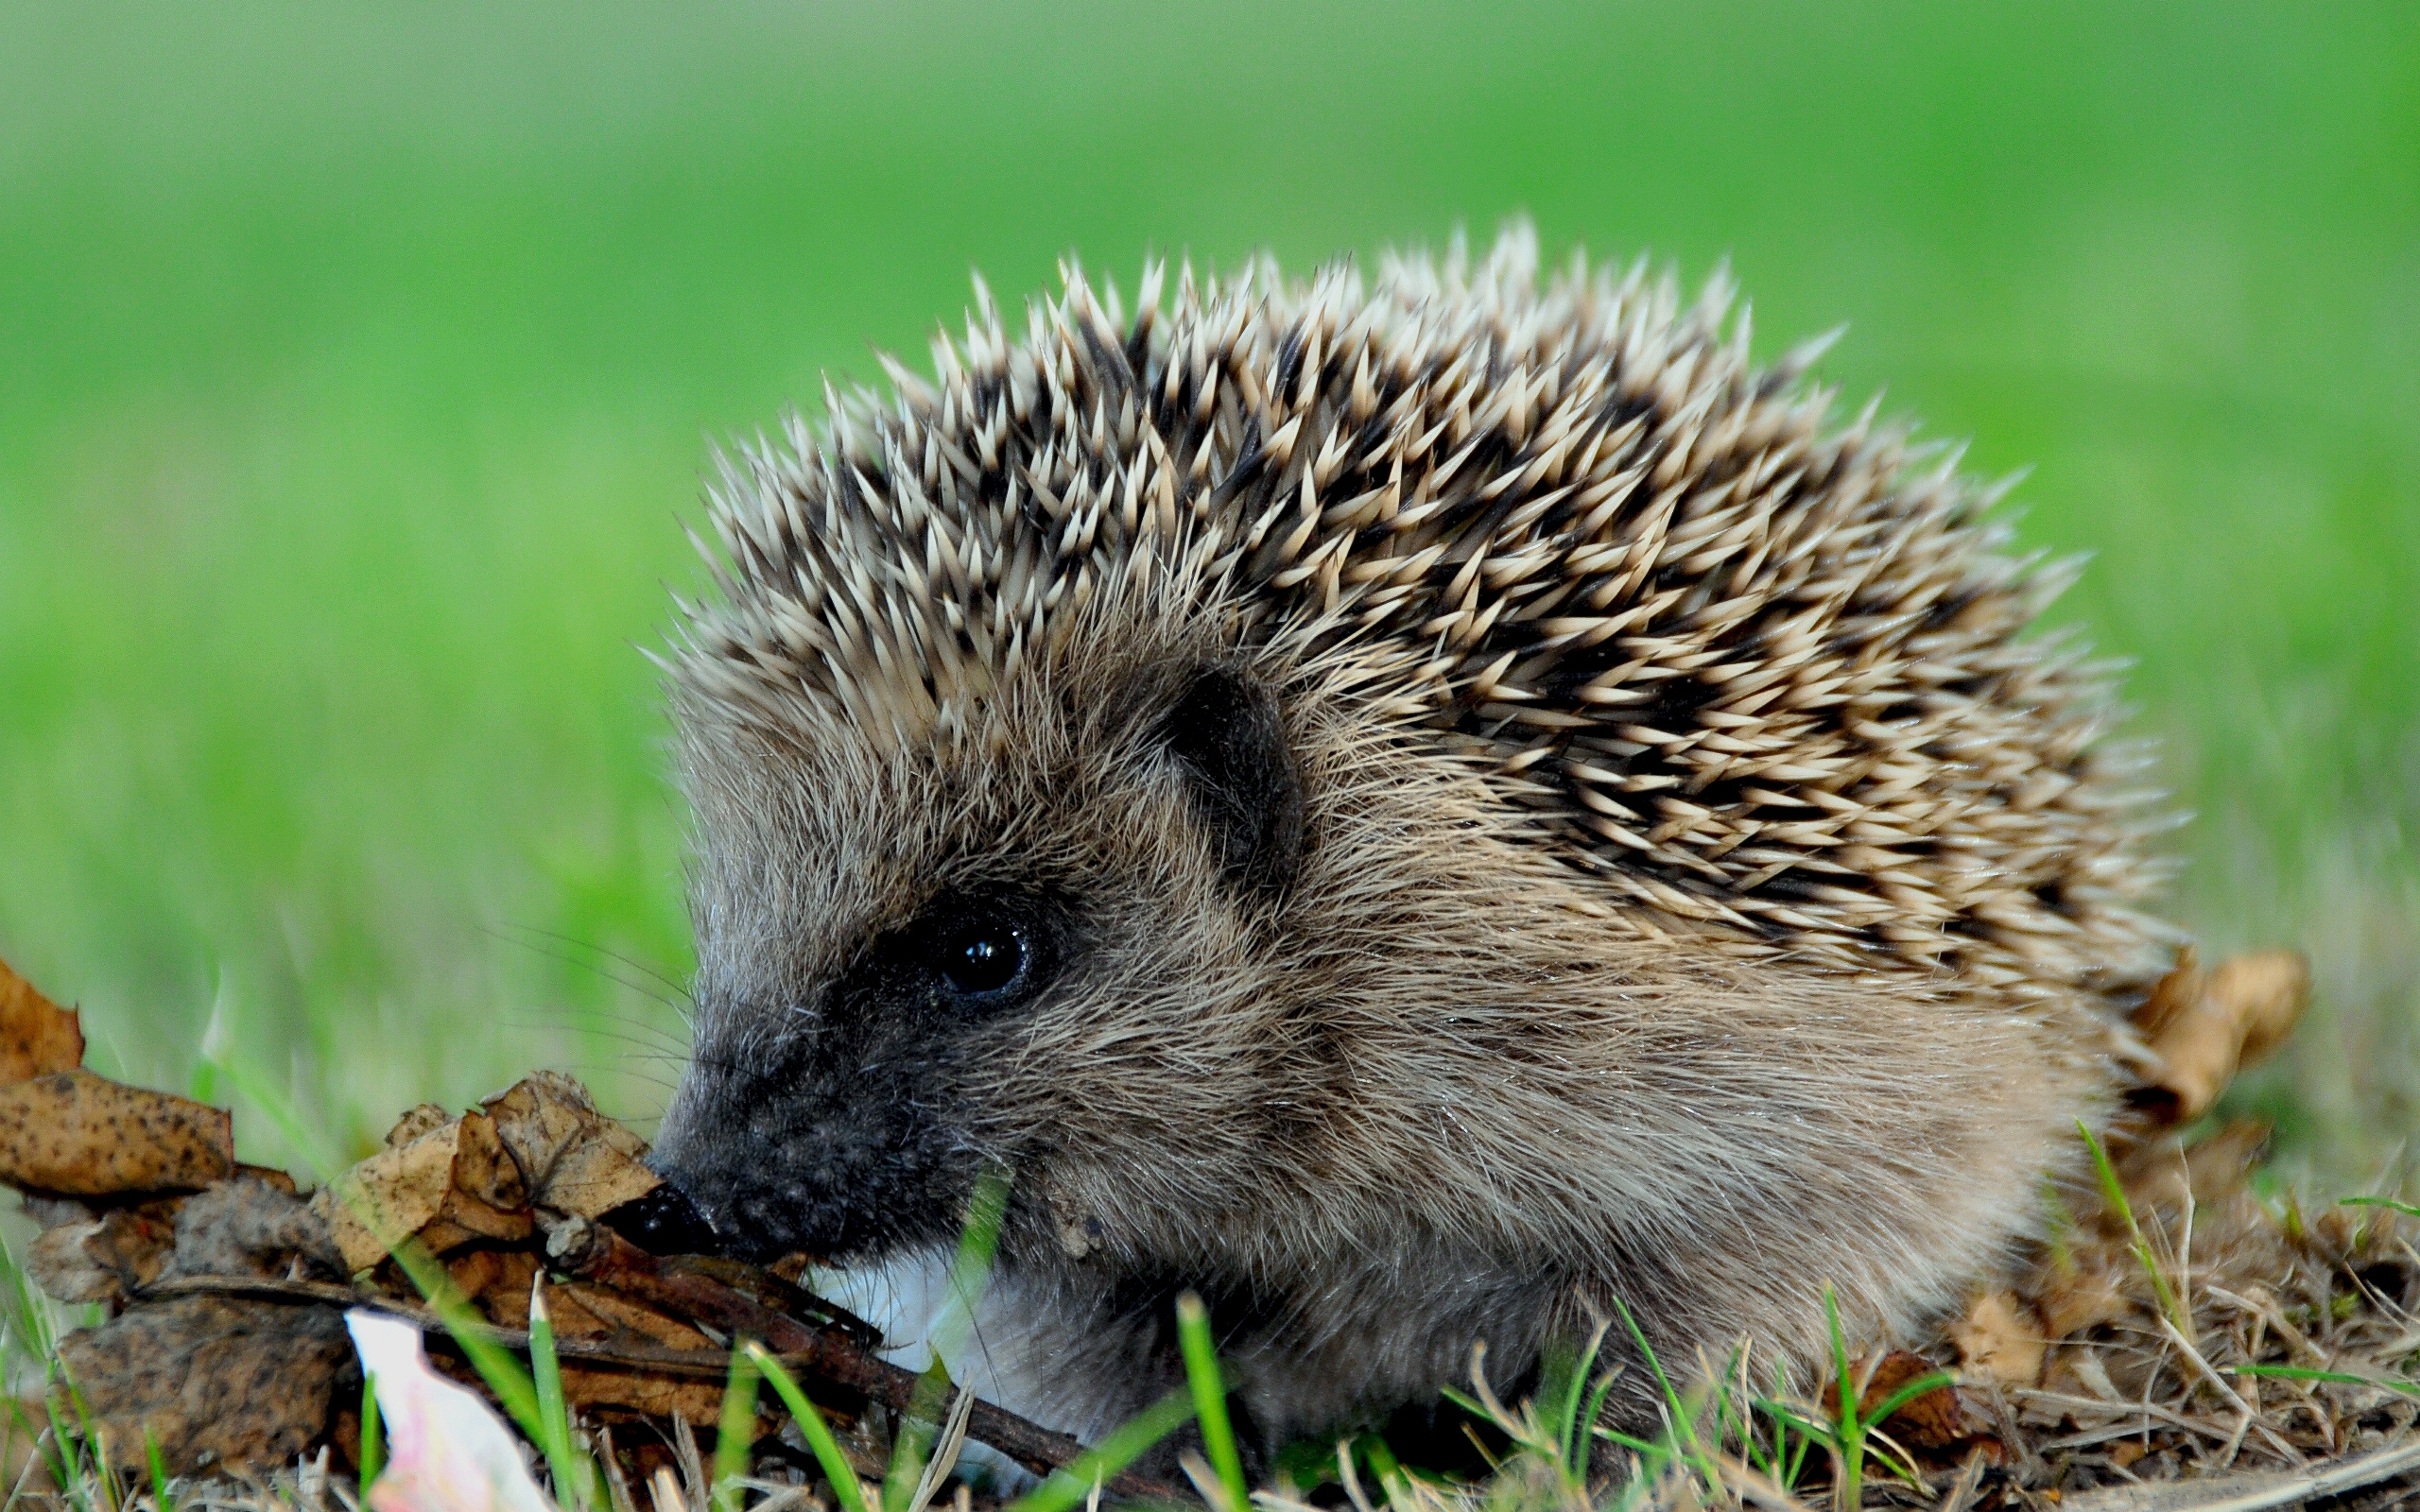 42823 download wallpaper animals, hedgehogs screensavers and pictures for free